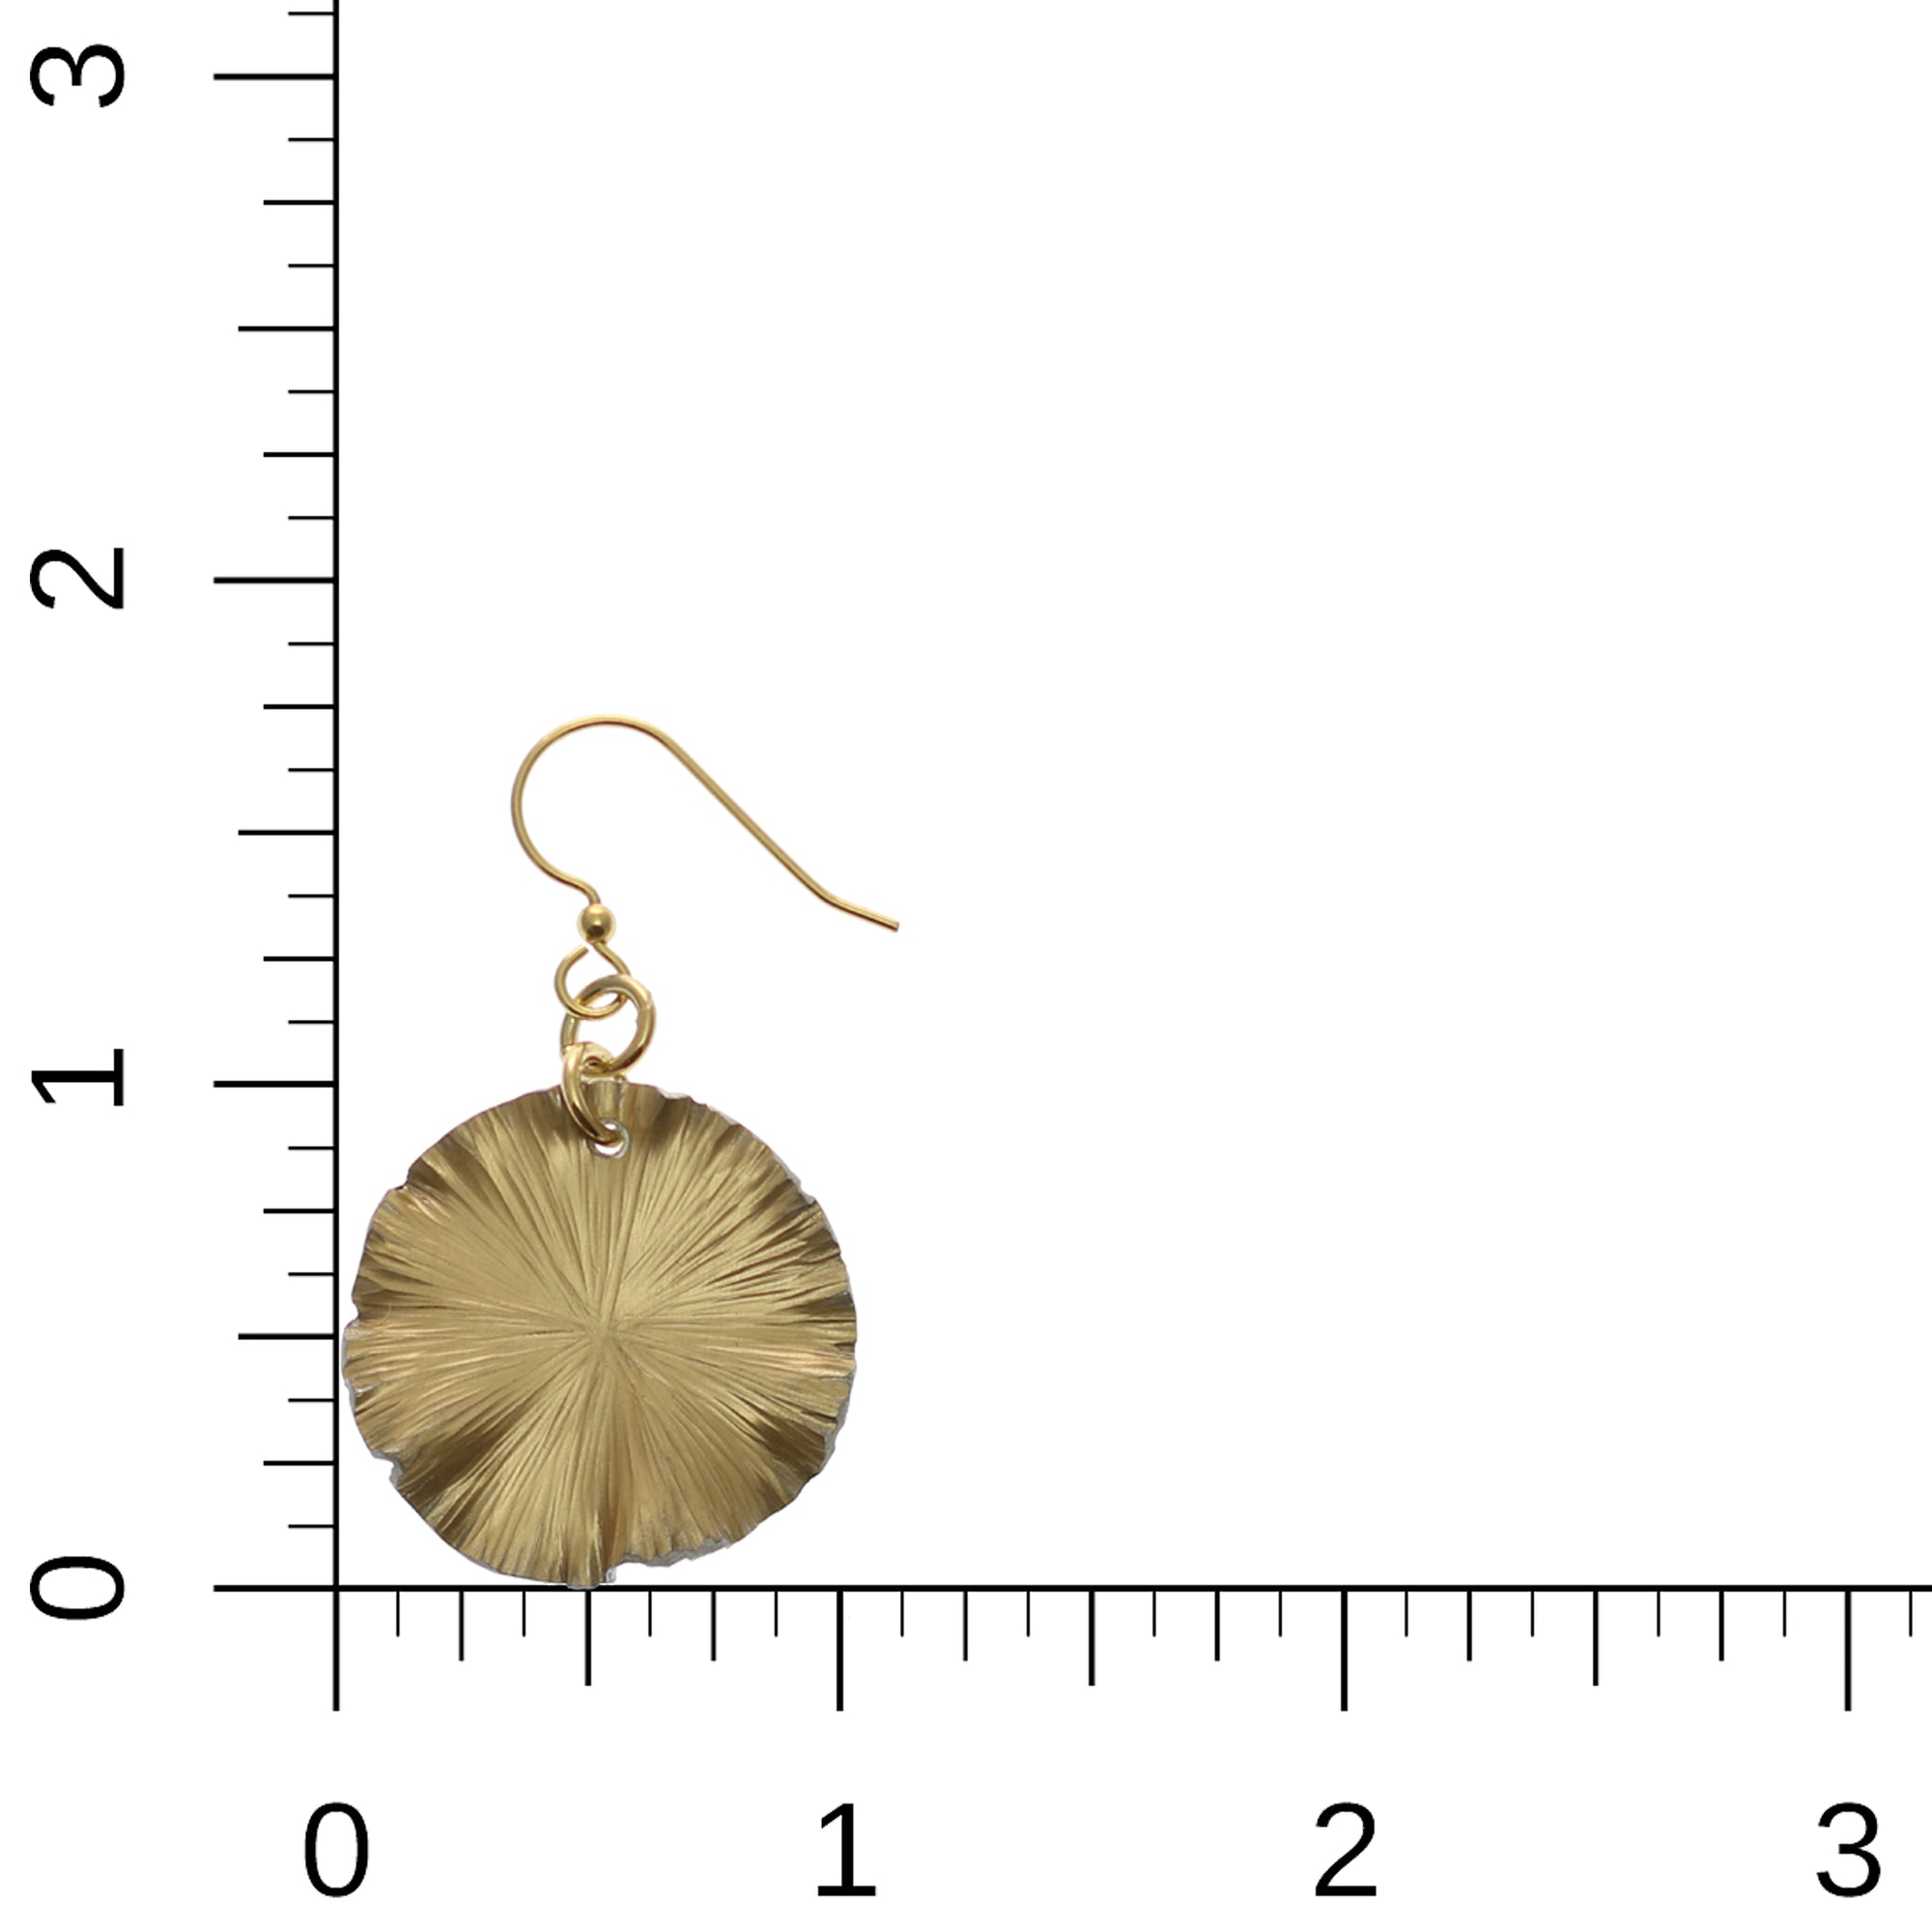 Small Gold Anodized Lily Pad Leaf Drop Earrings on Ruler for Size